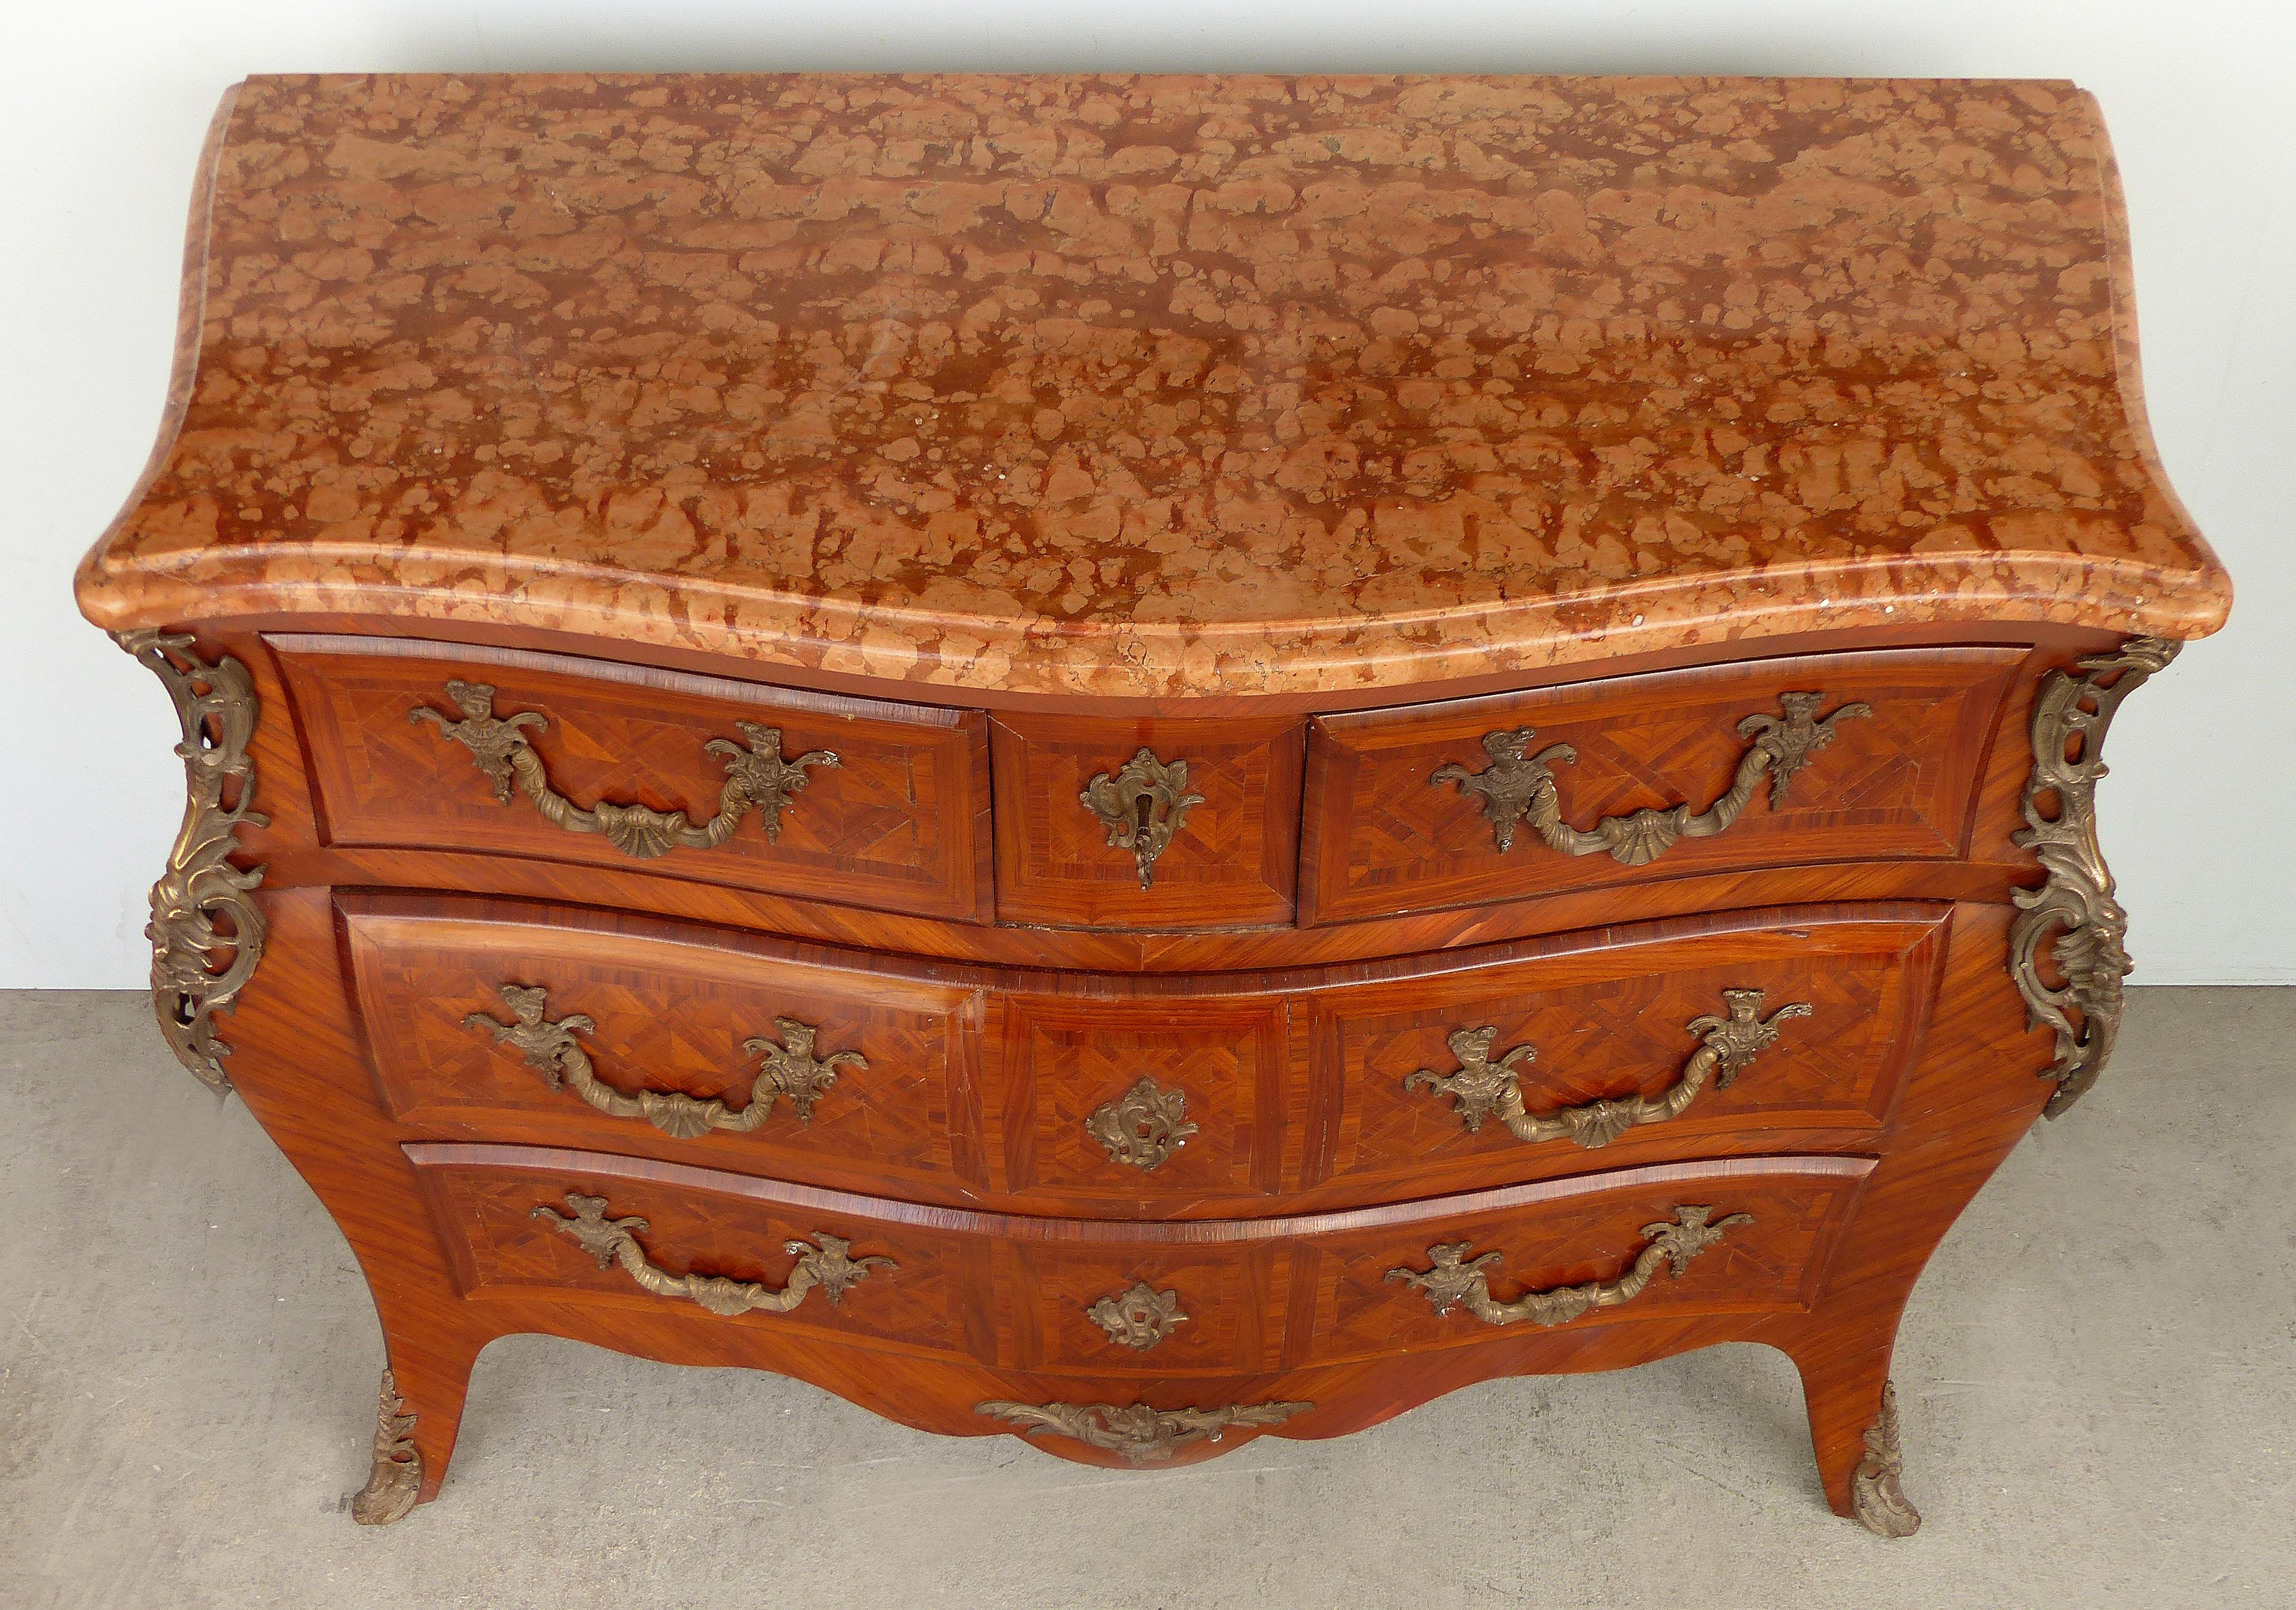 Italian Early 20th Century Bombe Commode with Bronze Mounts and Marble Top

Offered for sale is an early 20th century Italian bombe commode with wonderful parquetry and ornate bronze hardware. A fresh find from a Miami Beach estate, this beautiful